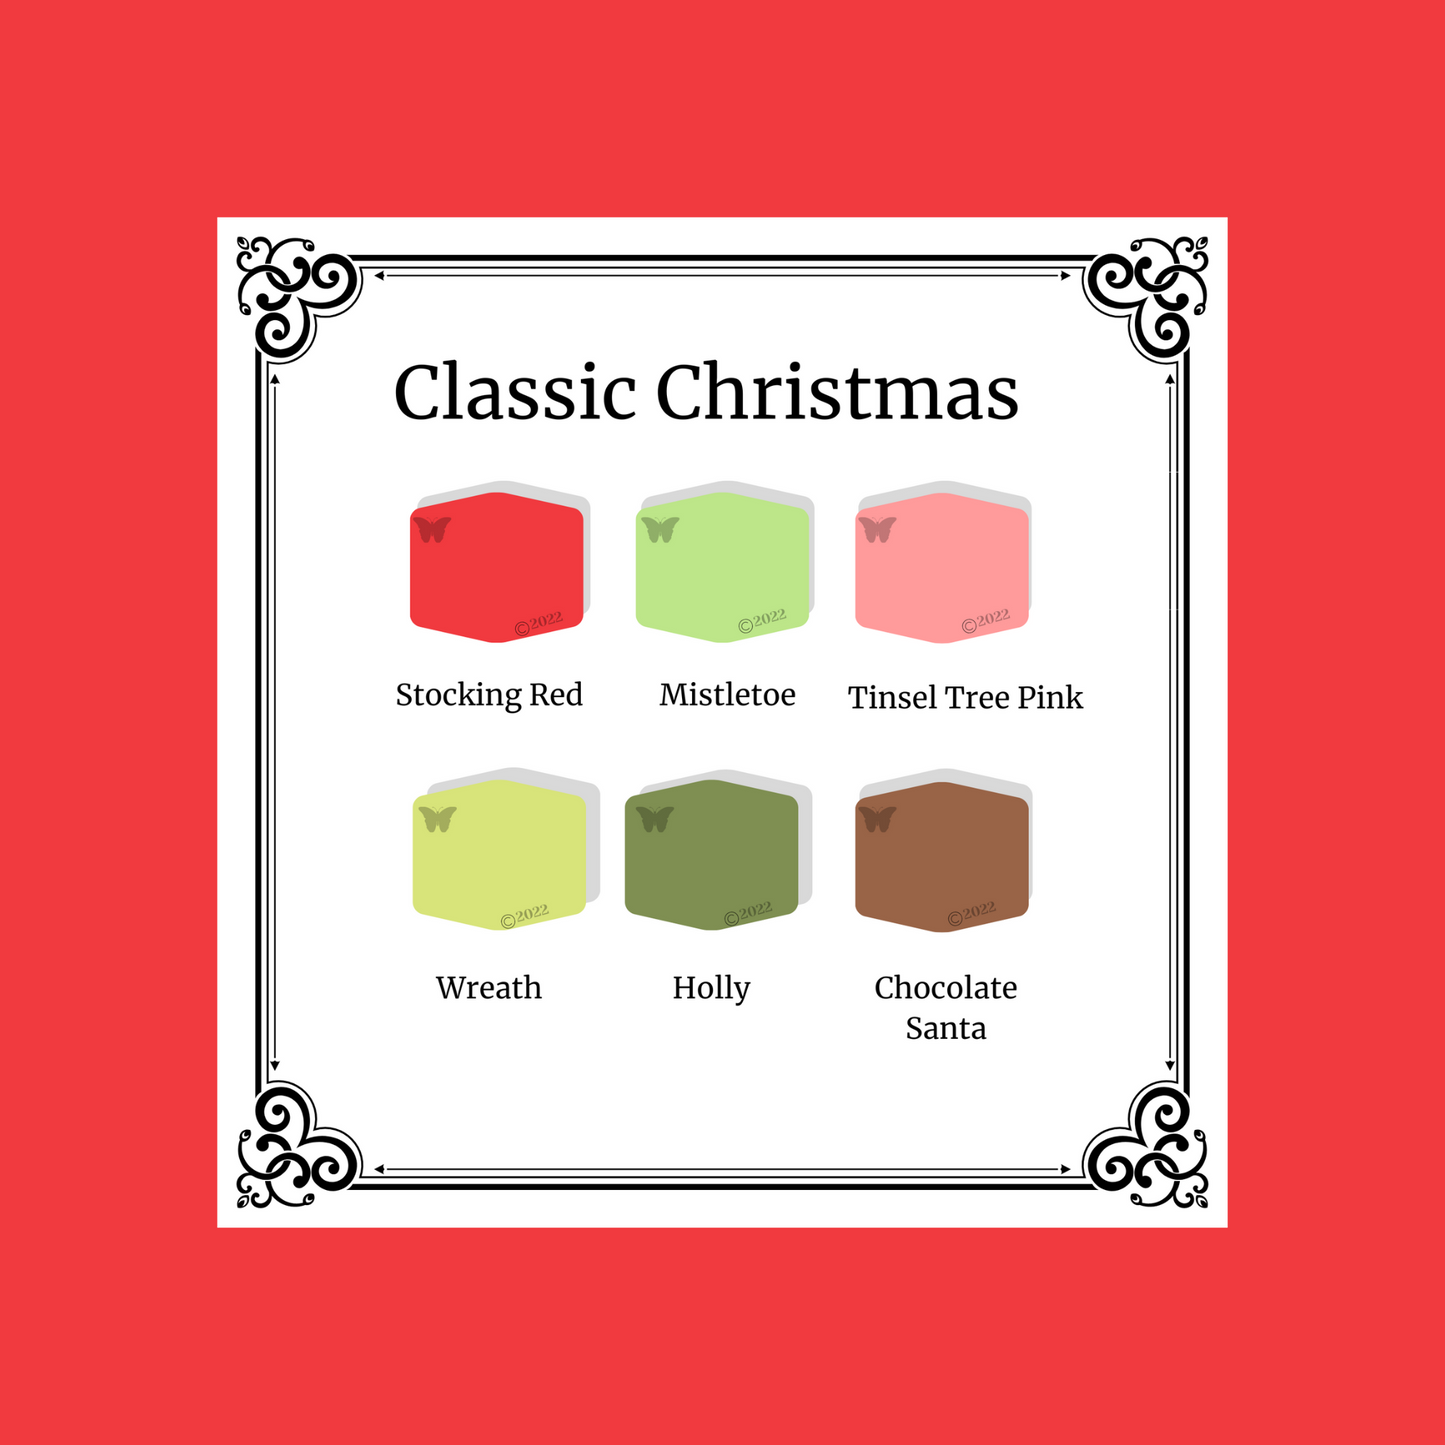 Classic Christmas 6 color palette on a stocking red background